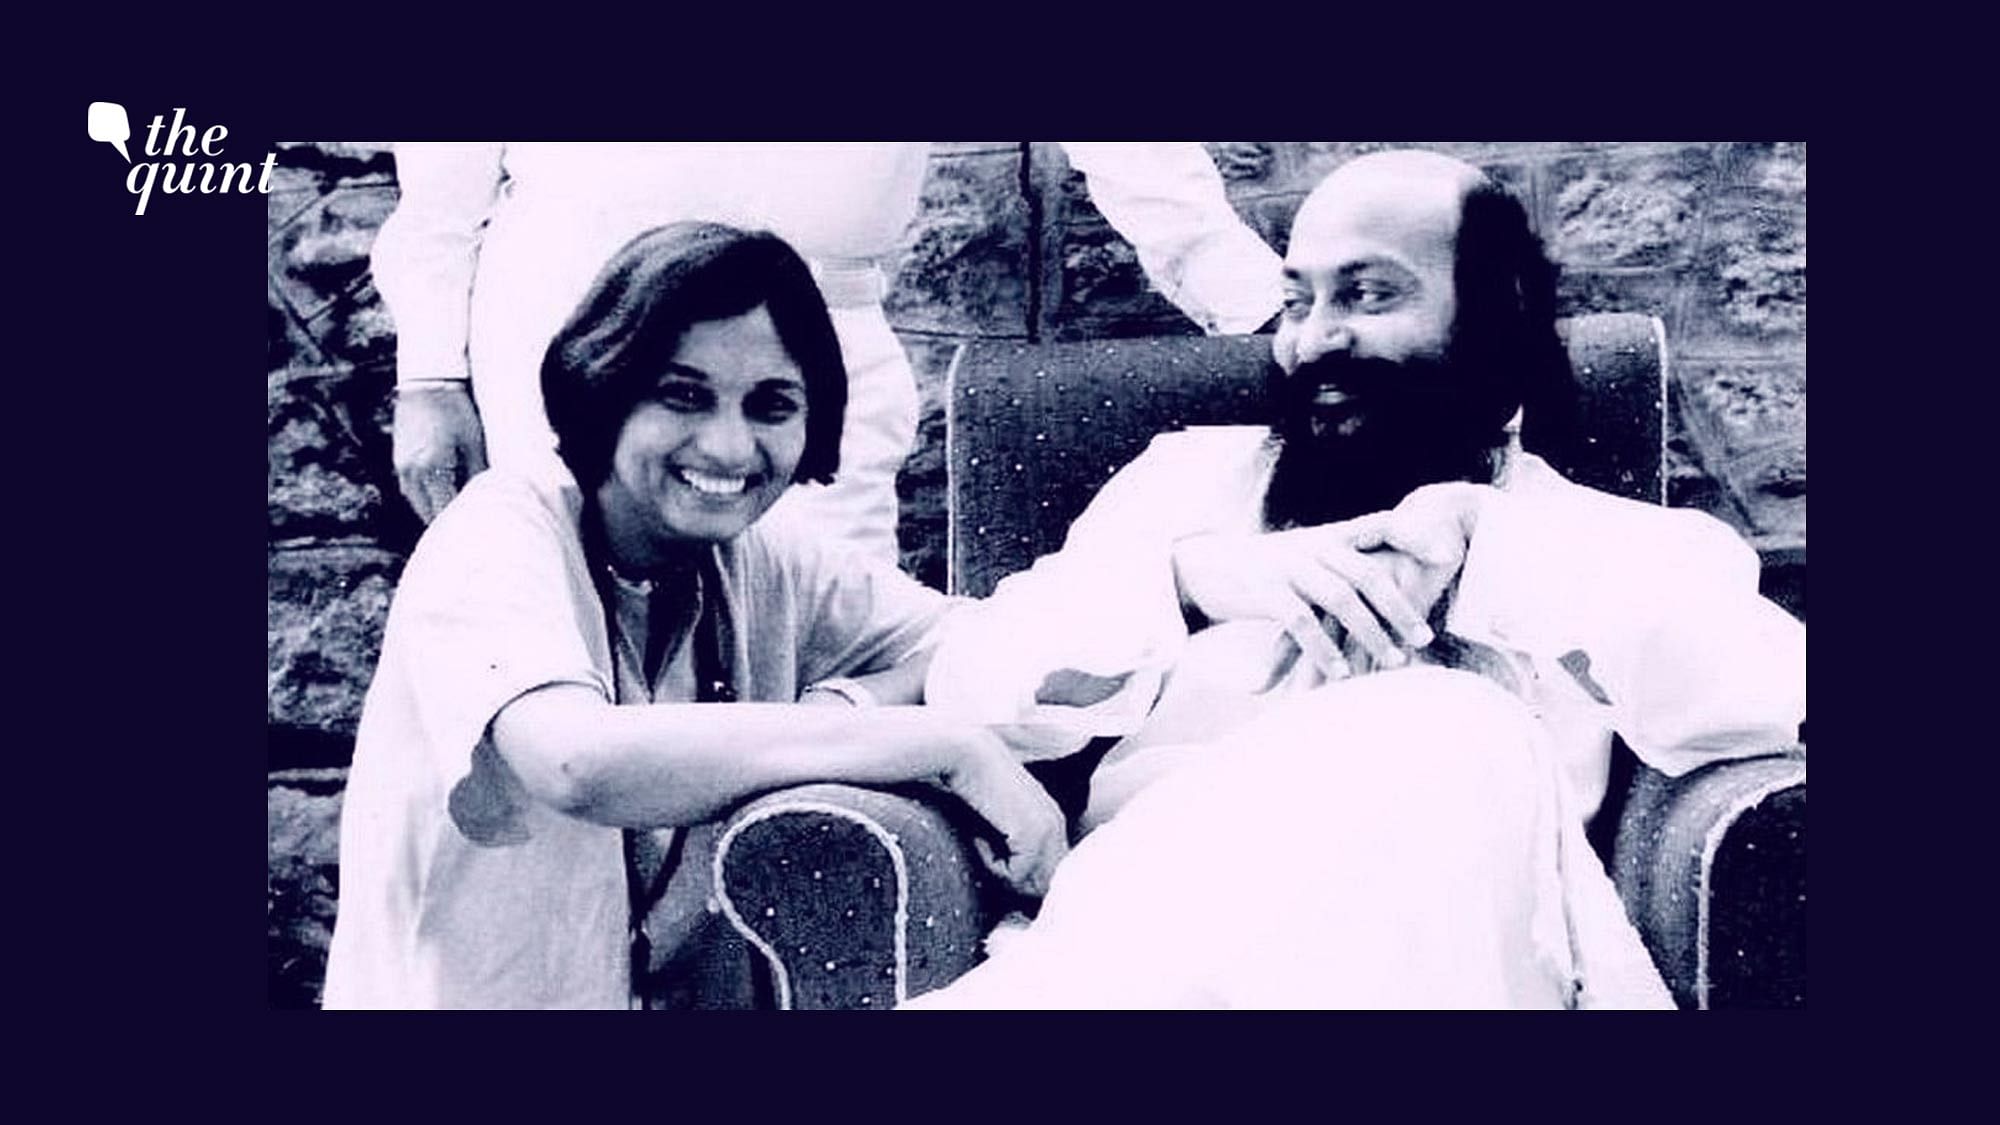 Ma Sheela talks about her relationship with Osho and India’s obsession with gurus and godmen.